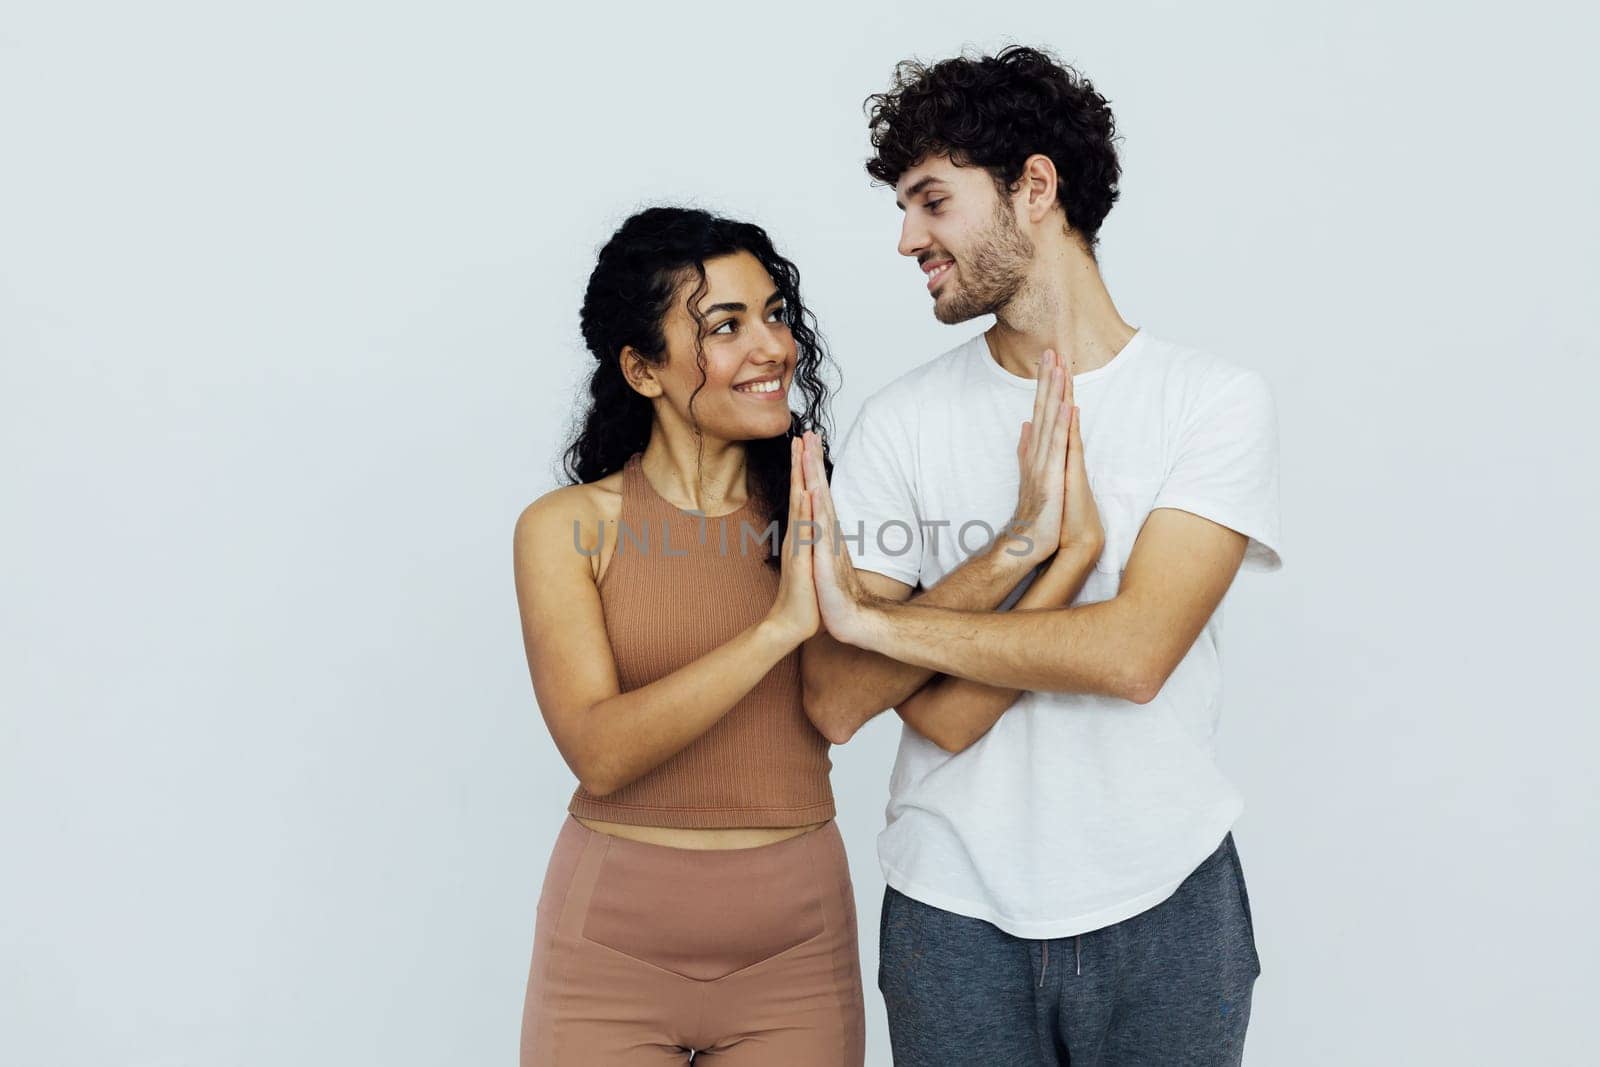 woman and a man put their hands together paired yoga